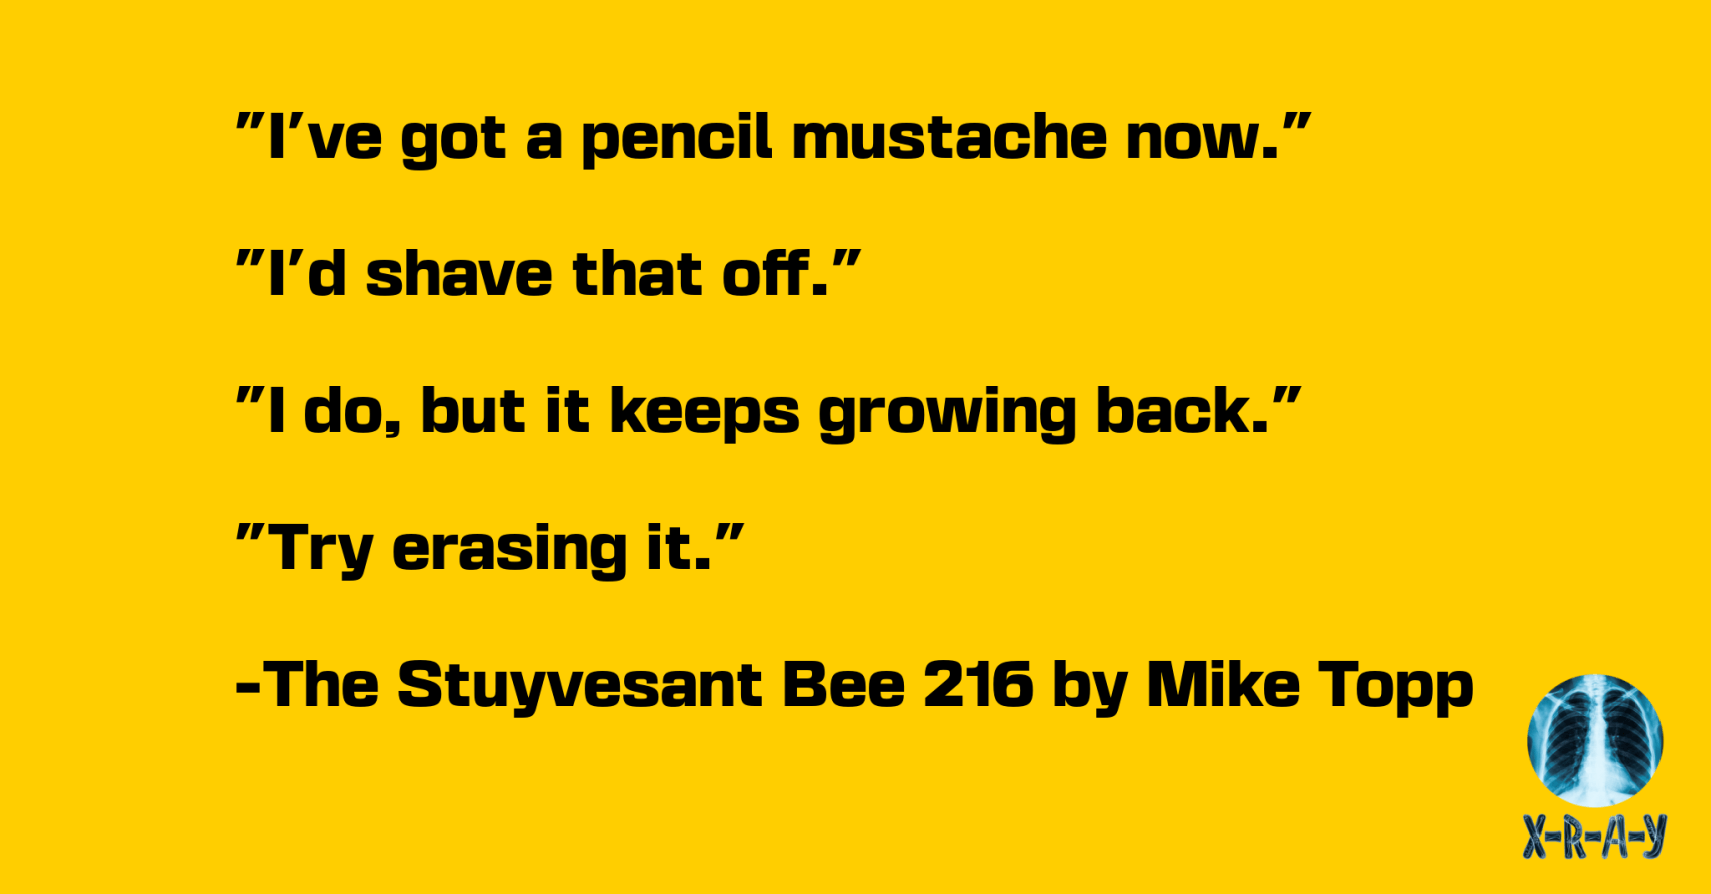 THE STUYVESANT BEE #216 by Mike Topp